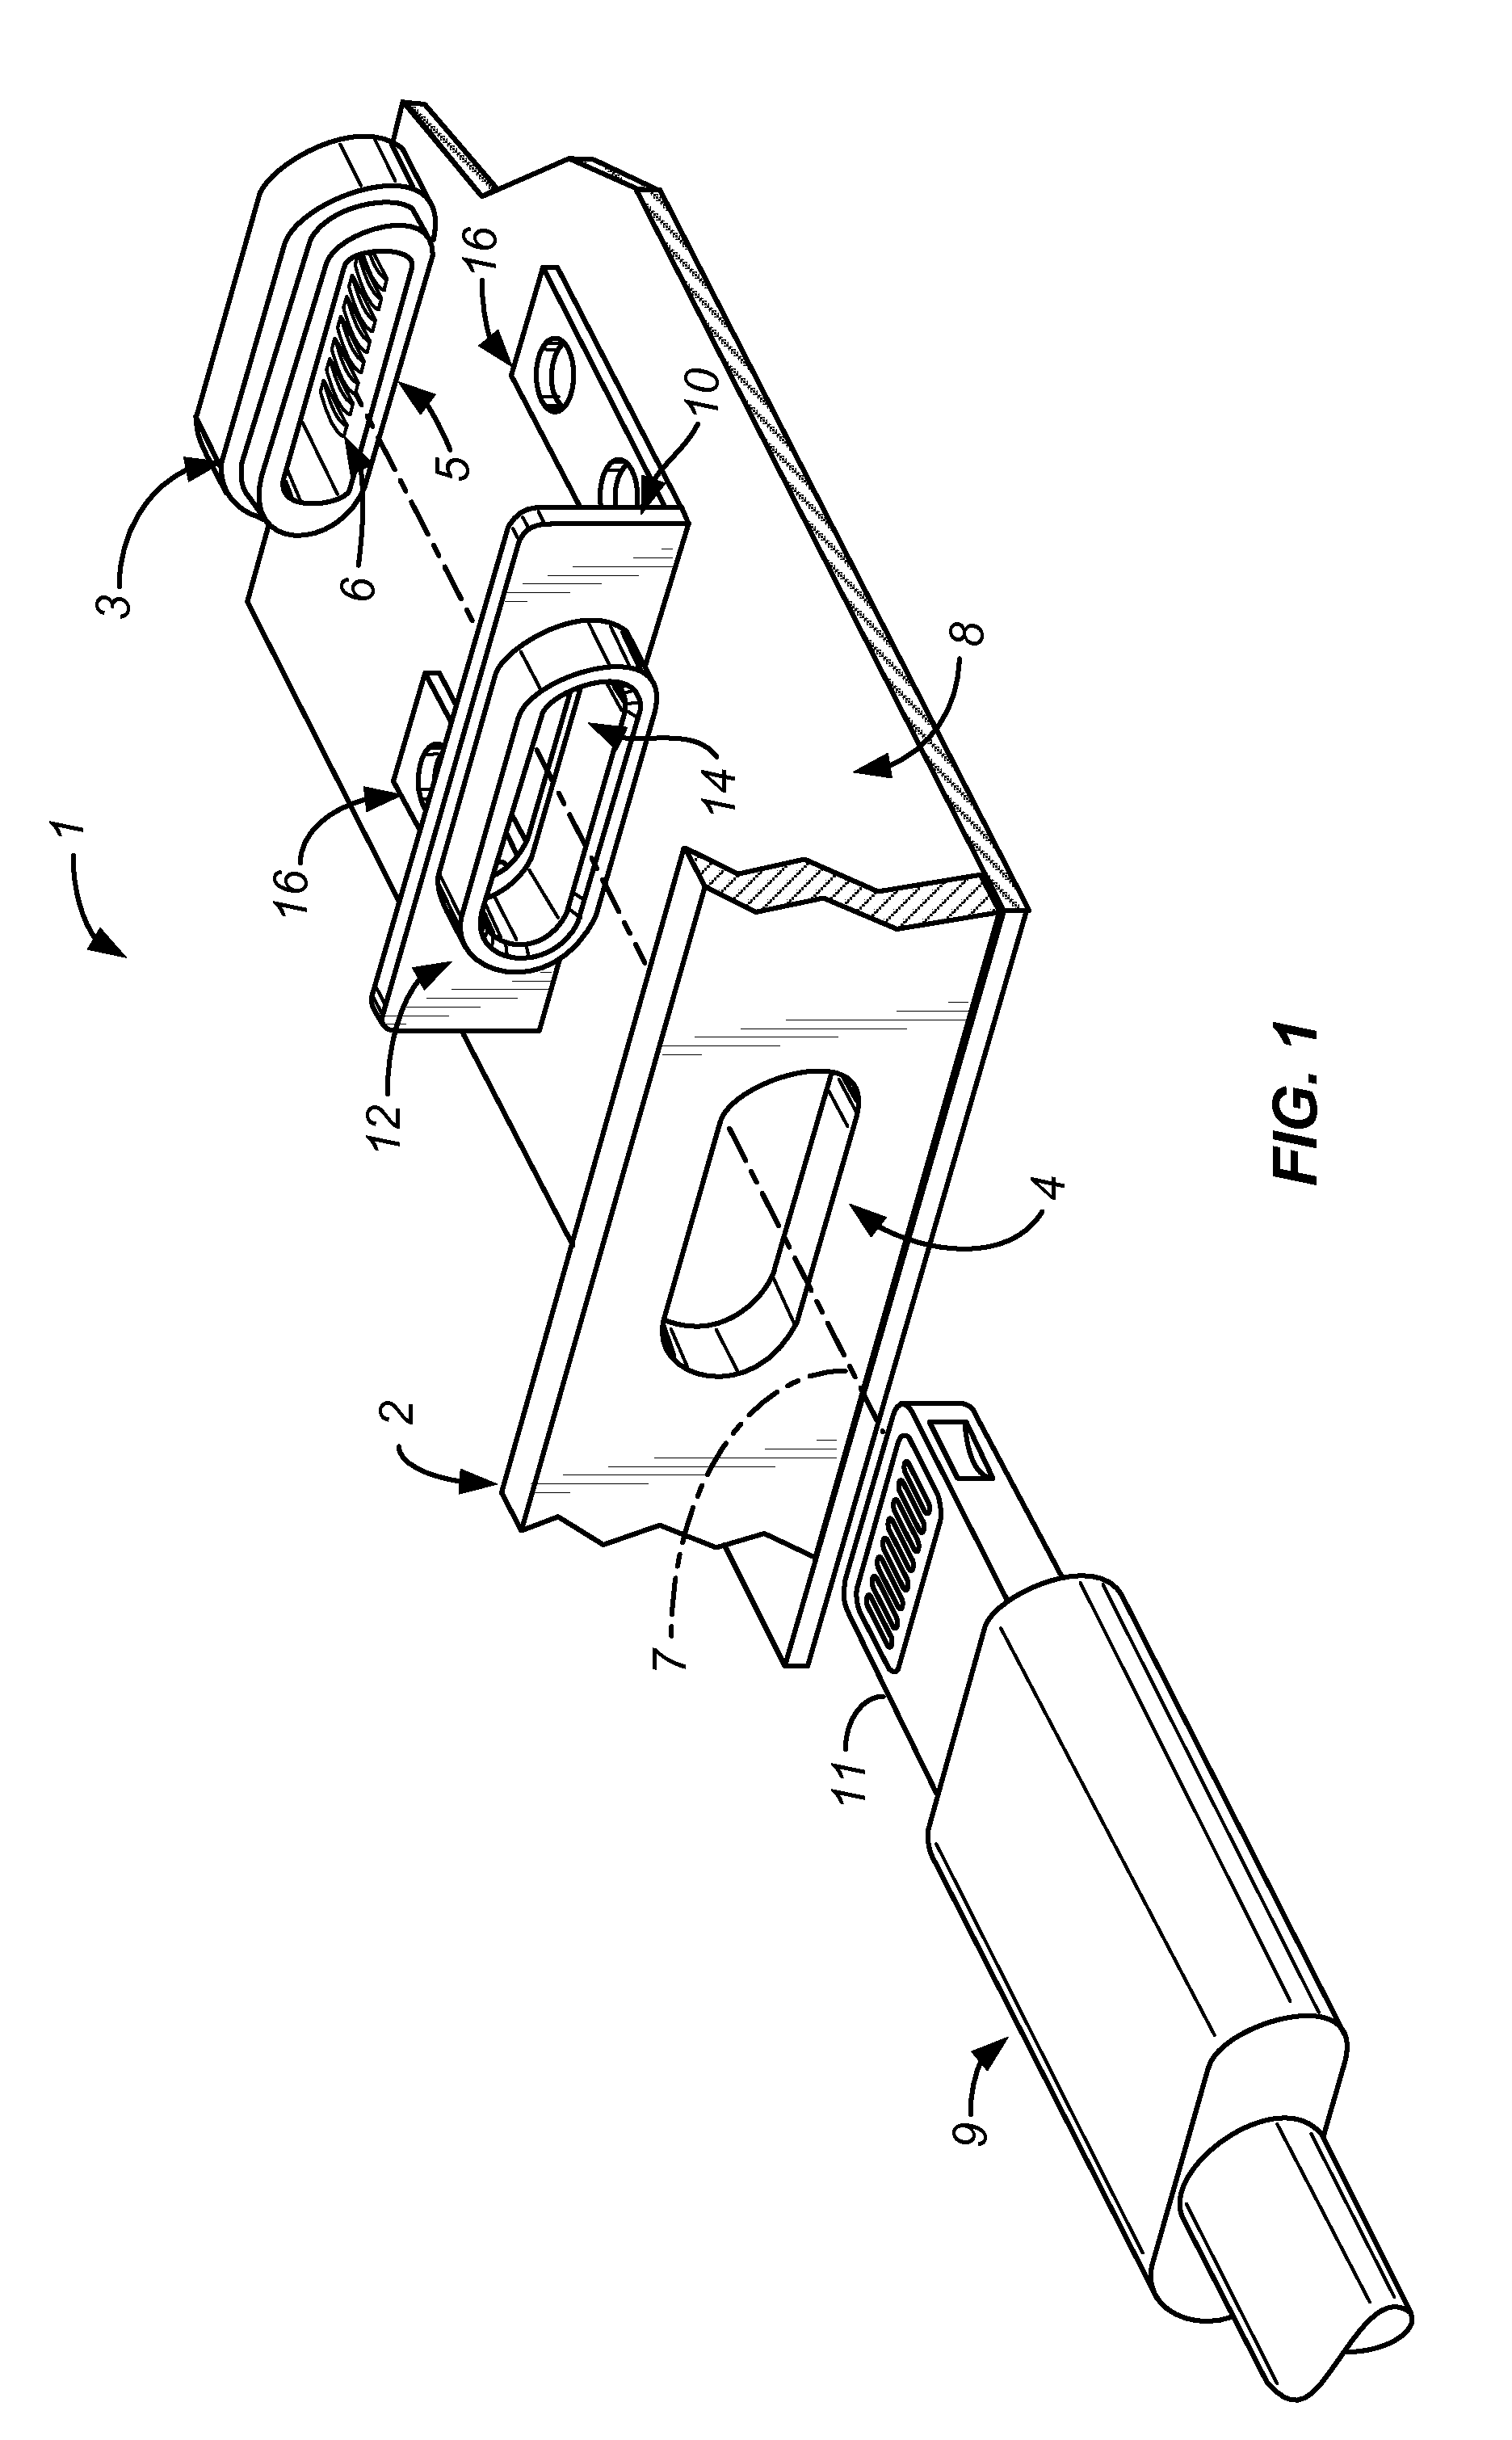 Trim for input/output architecture in an electronic device